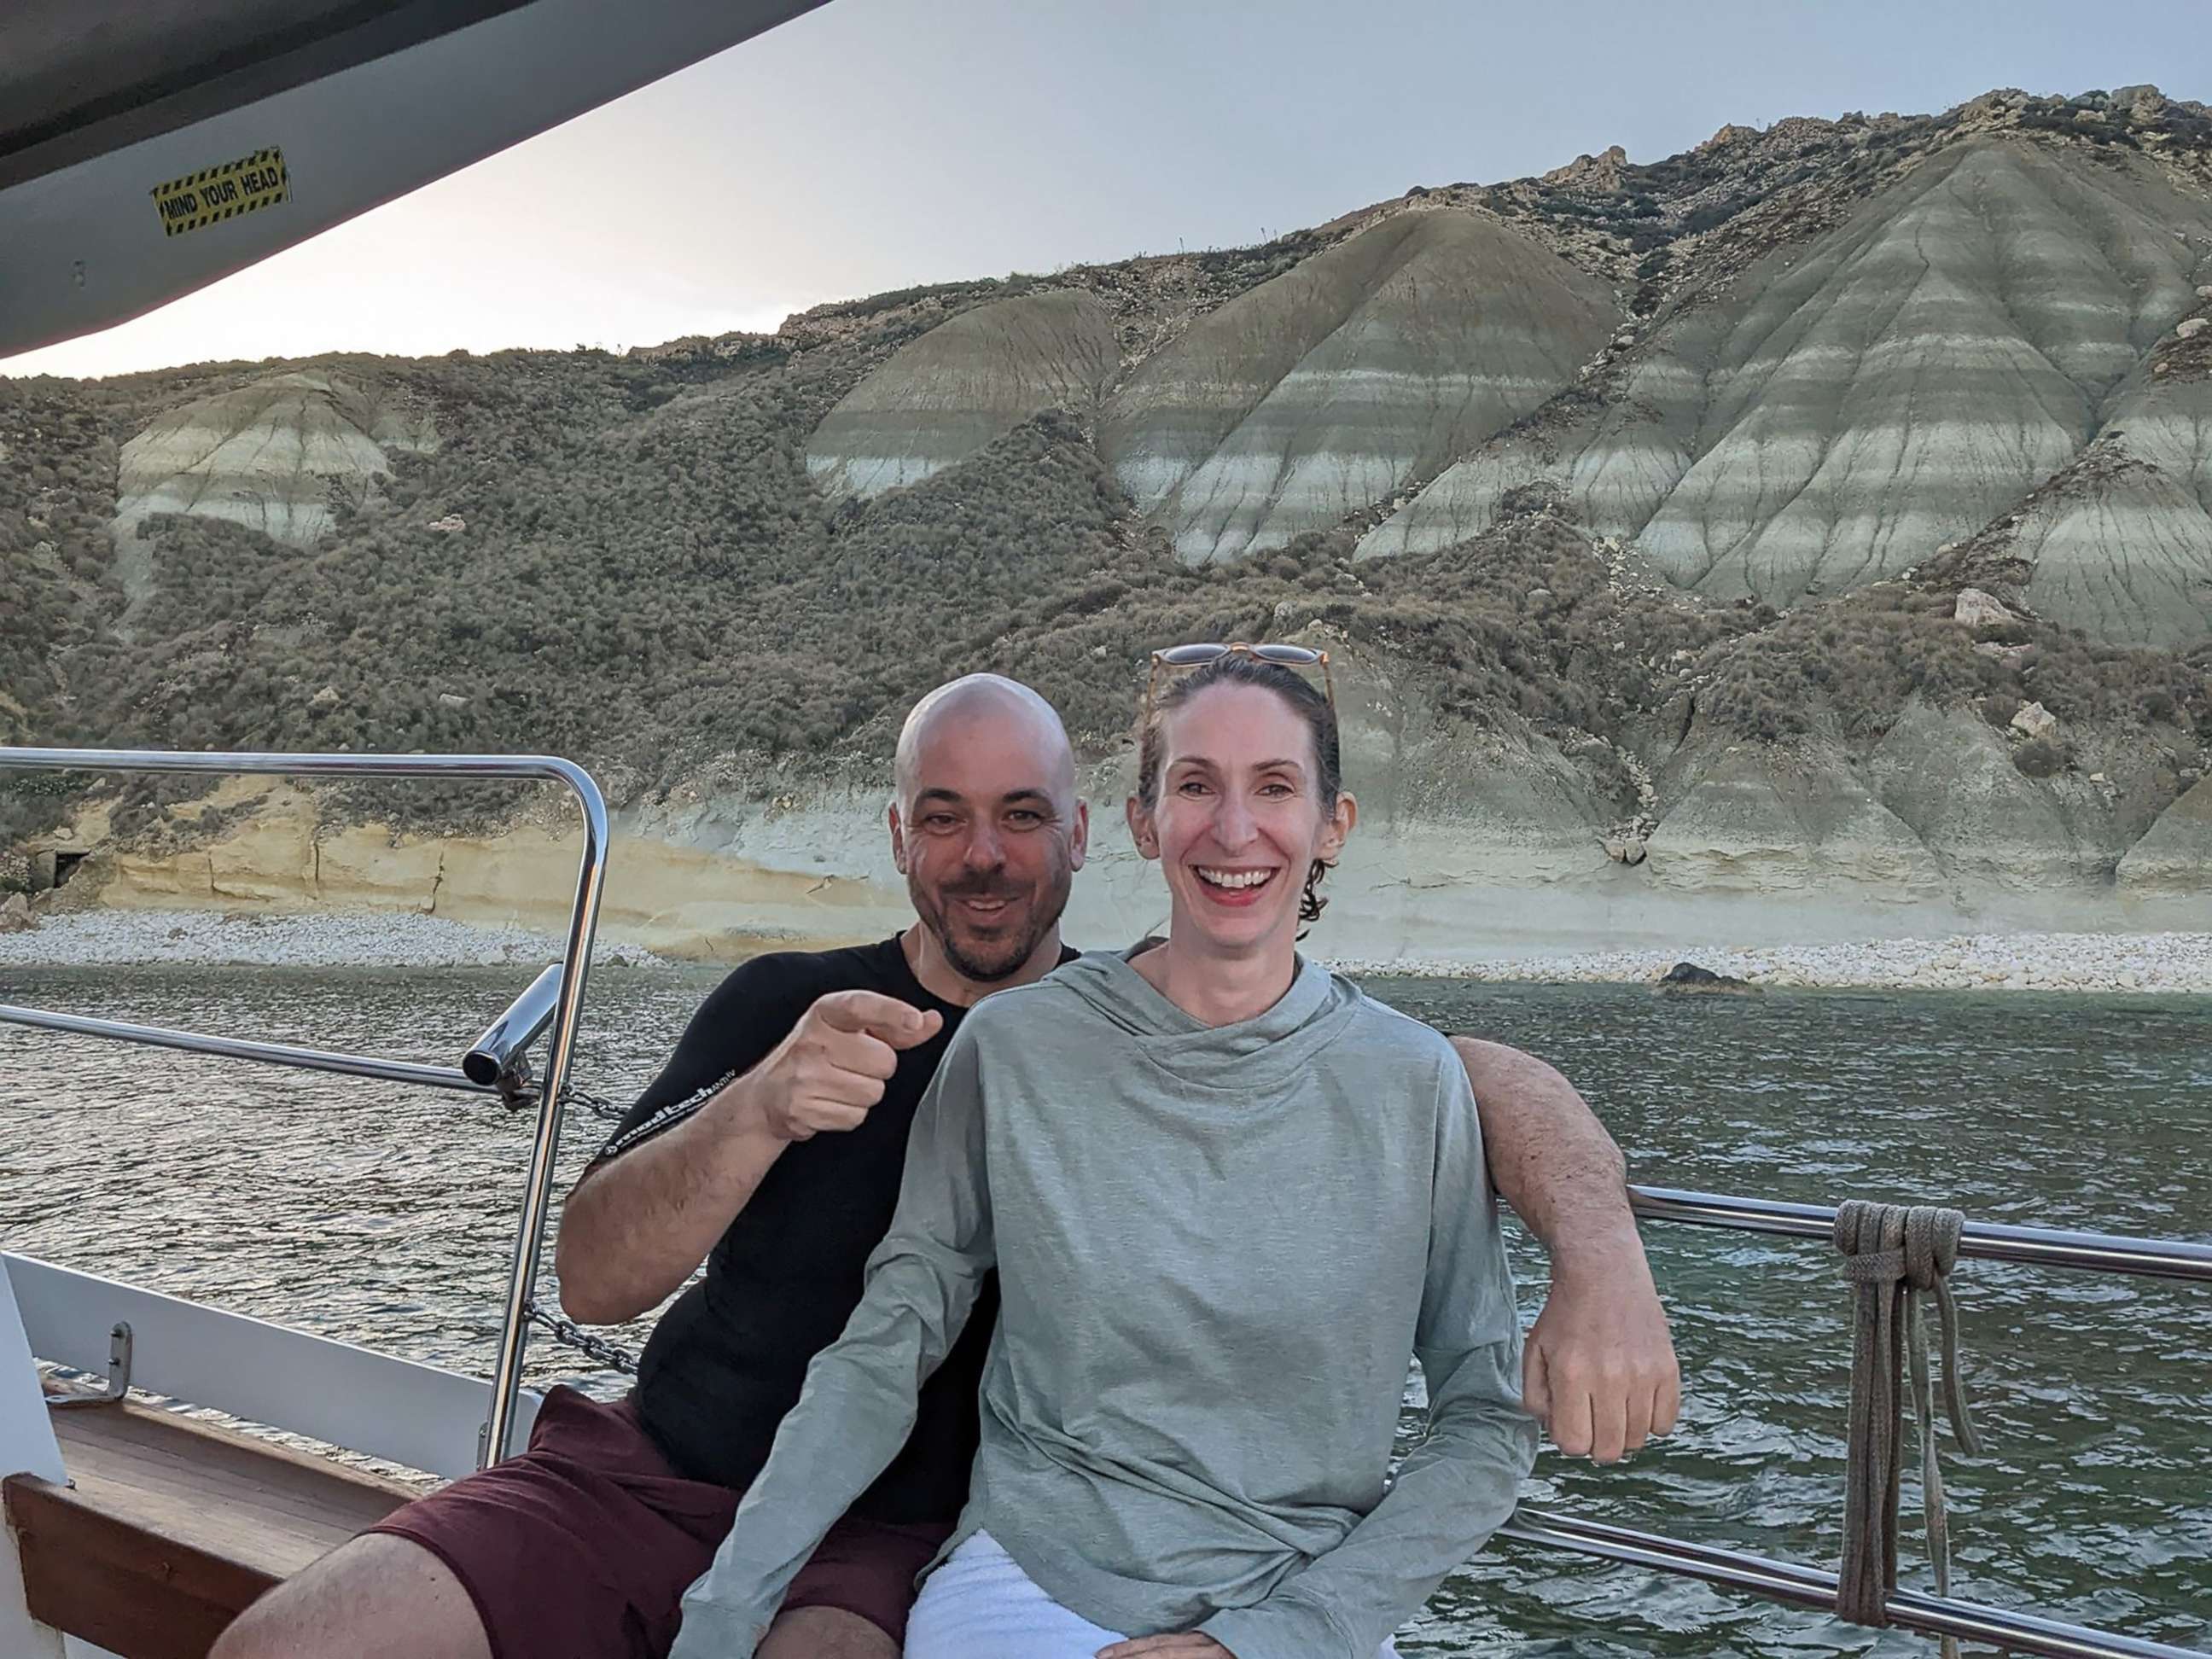 PHOTO: Jay Weeldreyer and Andrea Prudente, while vacationing in Malta, before she suffered an incomplete miscarriage and had to be airlifted out of the country to obtain medical care due to Malta's prohibition of abortion.